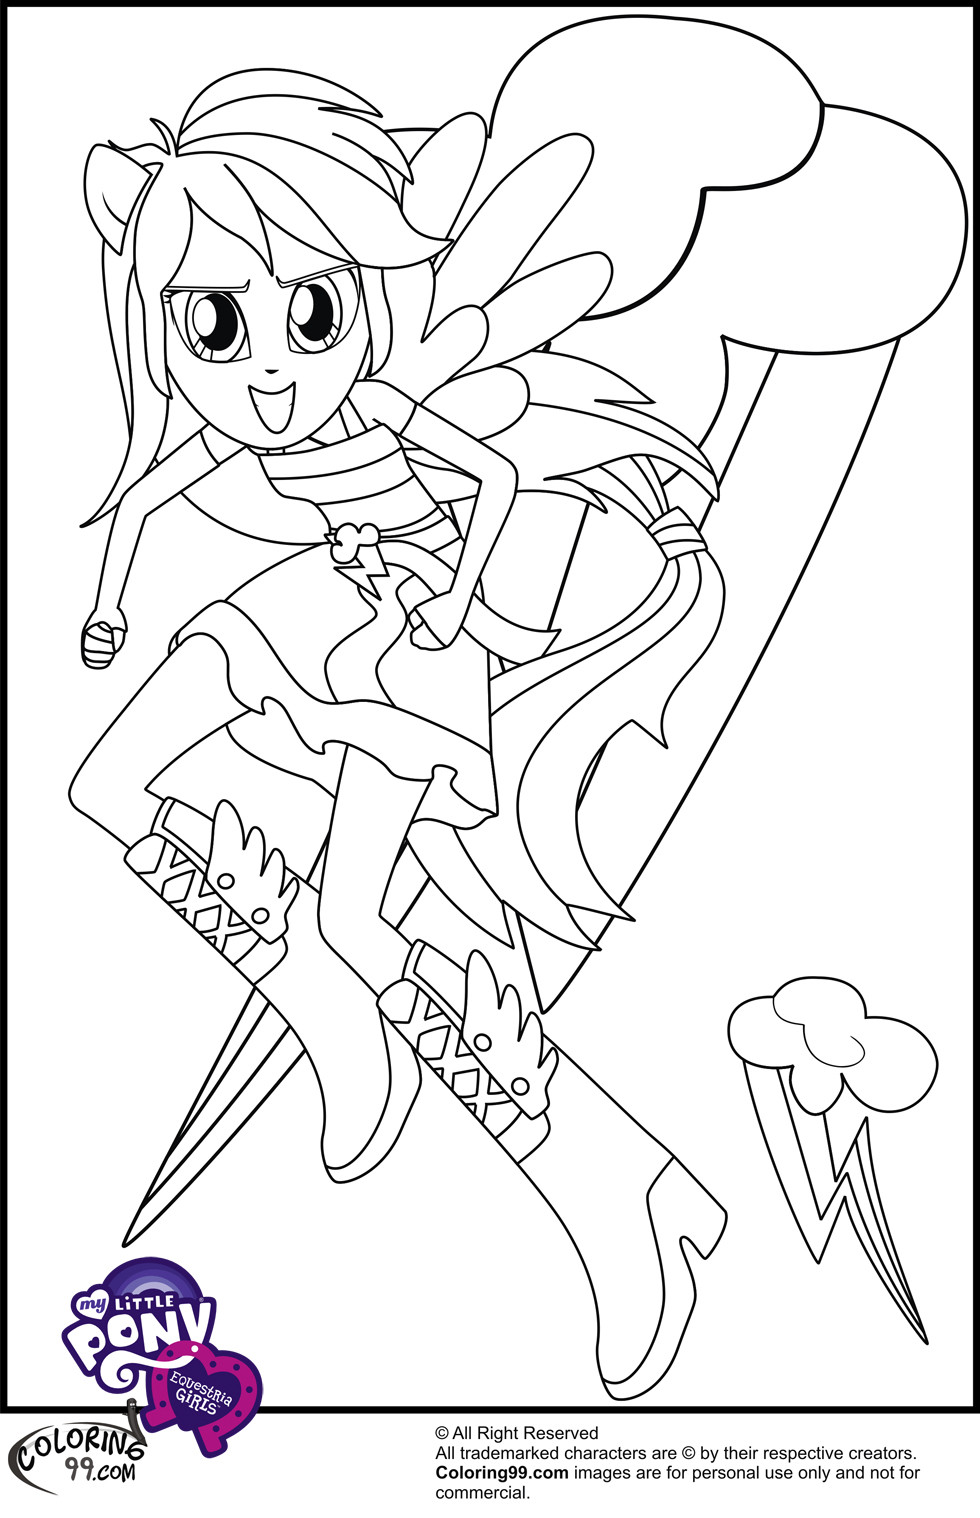 Girls Coloring Pages
 My Little Pony Equestria Girls Coloring Pages